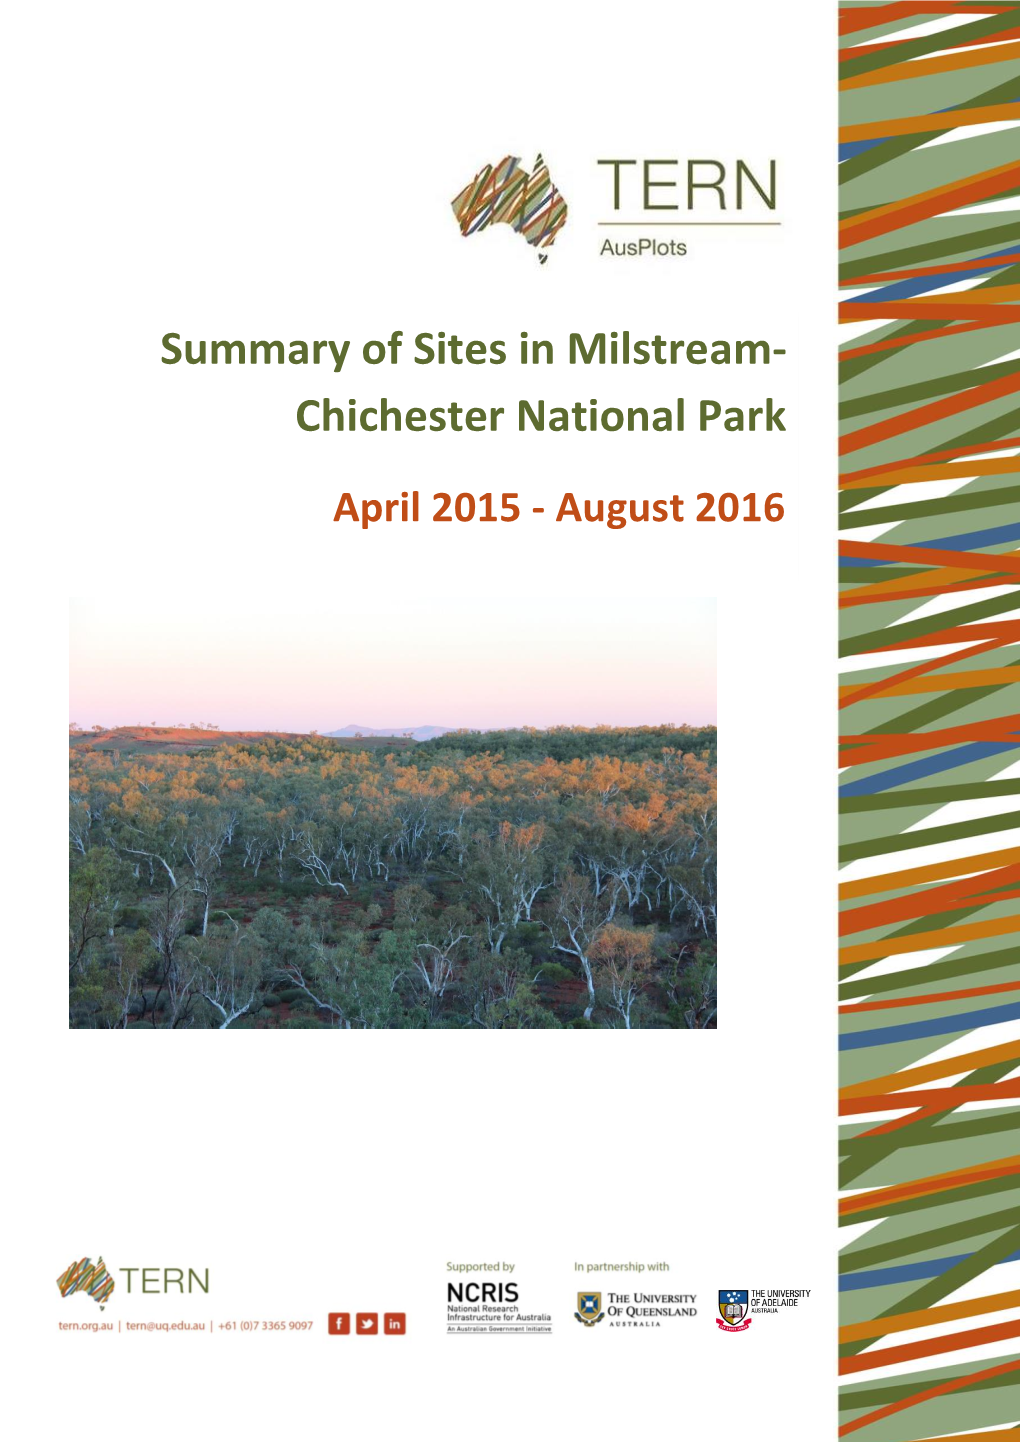 Summary of Sites in Milstream- Chichester National